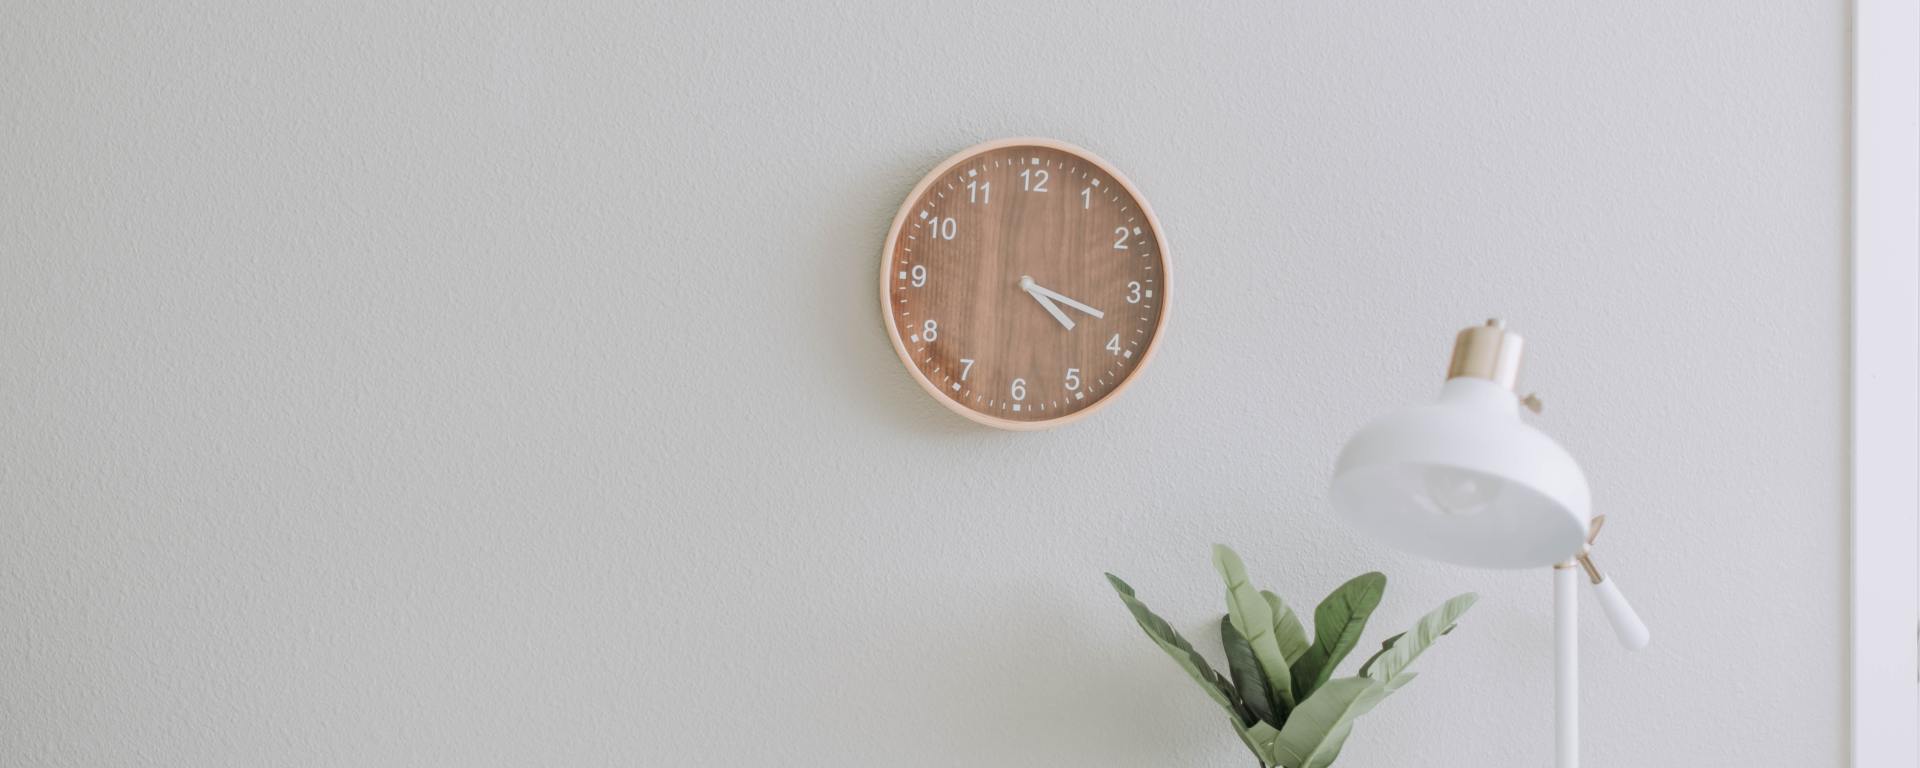 An image of a clock on a wall, a plant and lamp on a desk below.